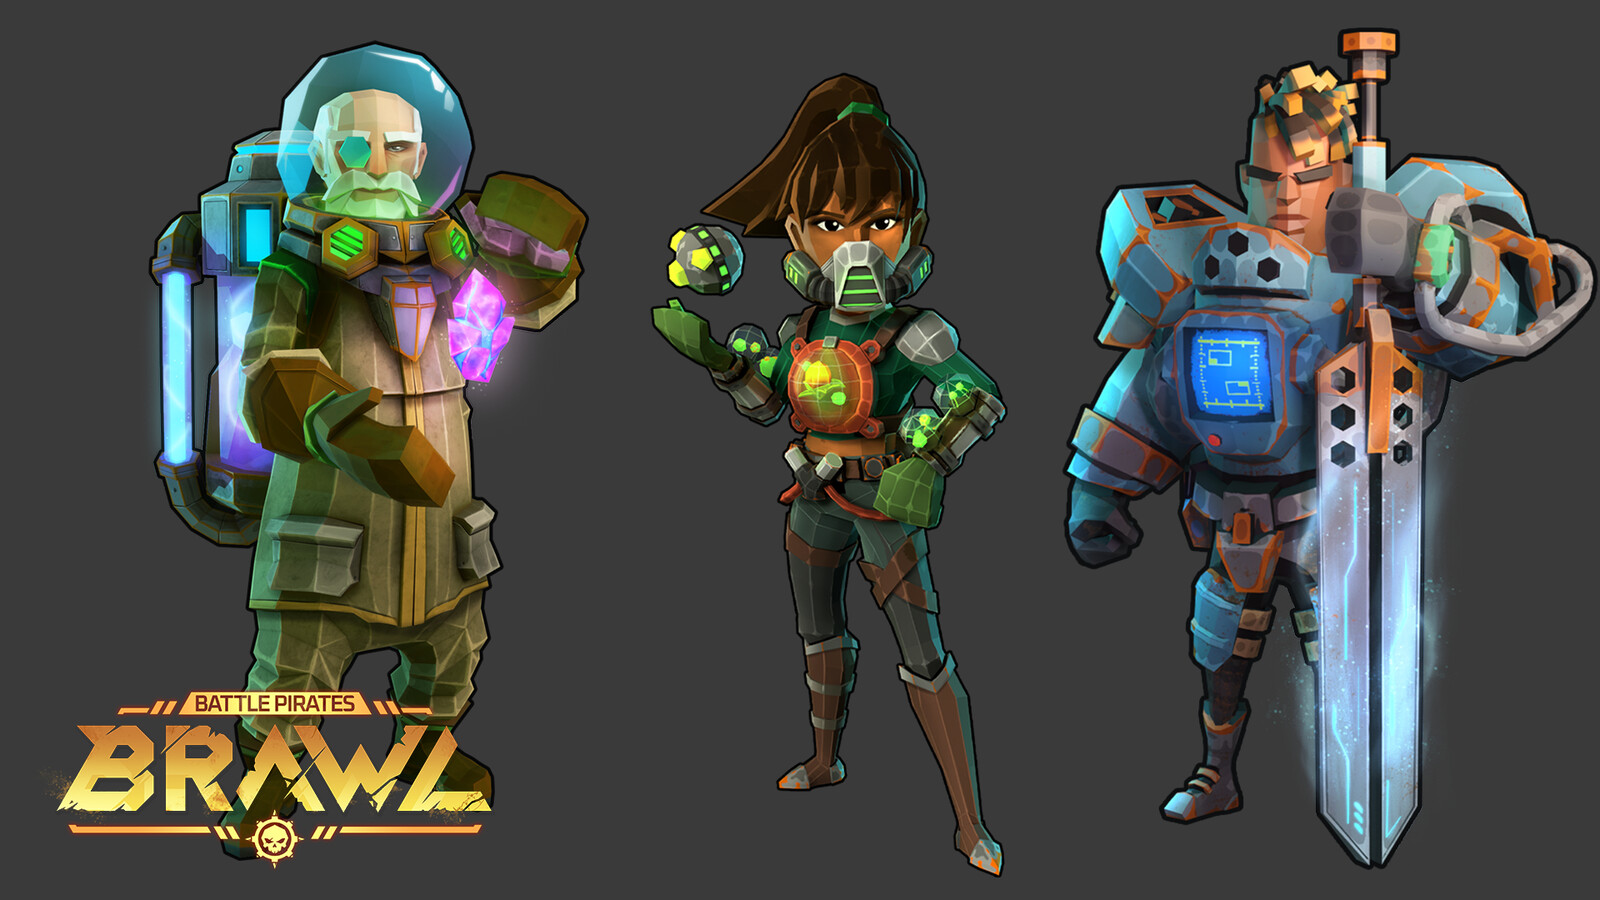 Contributions: Modelling, shader work, and texturing was a collaborative effort for these three characters.